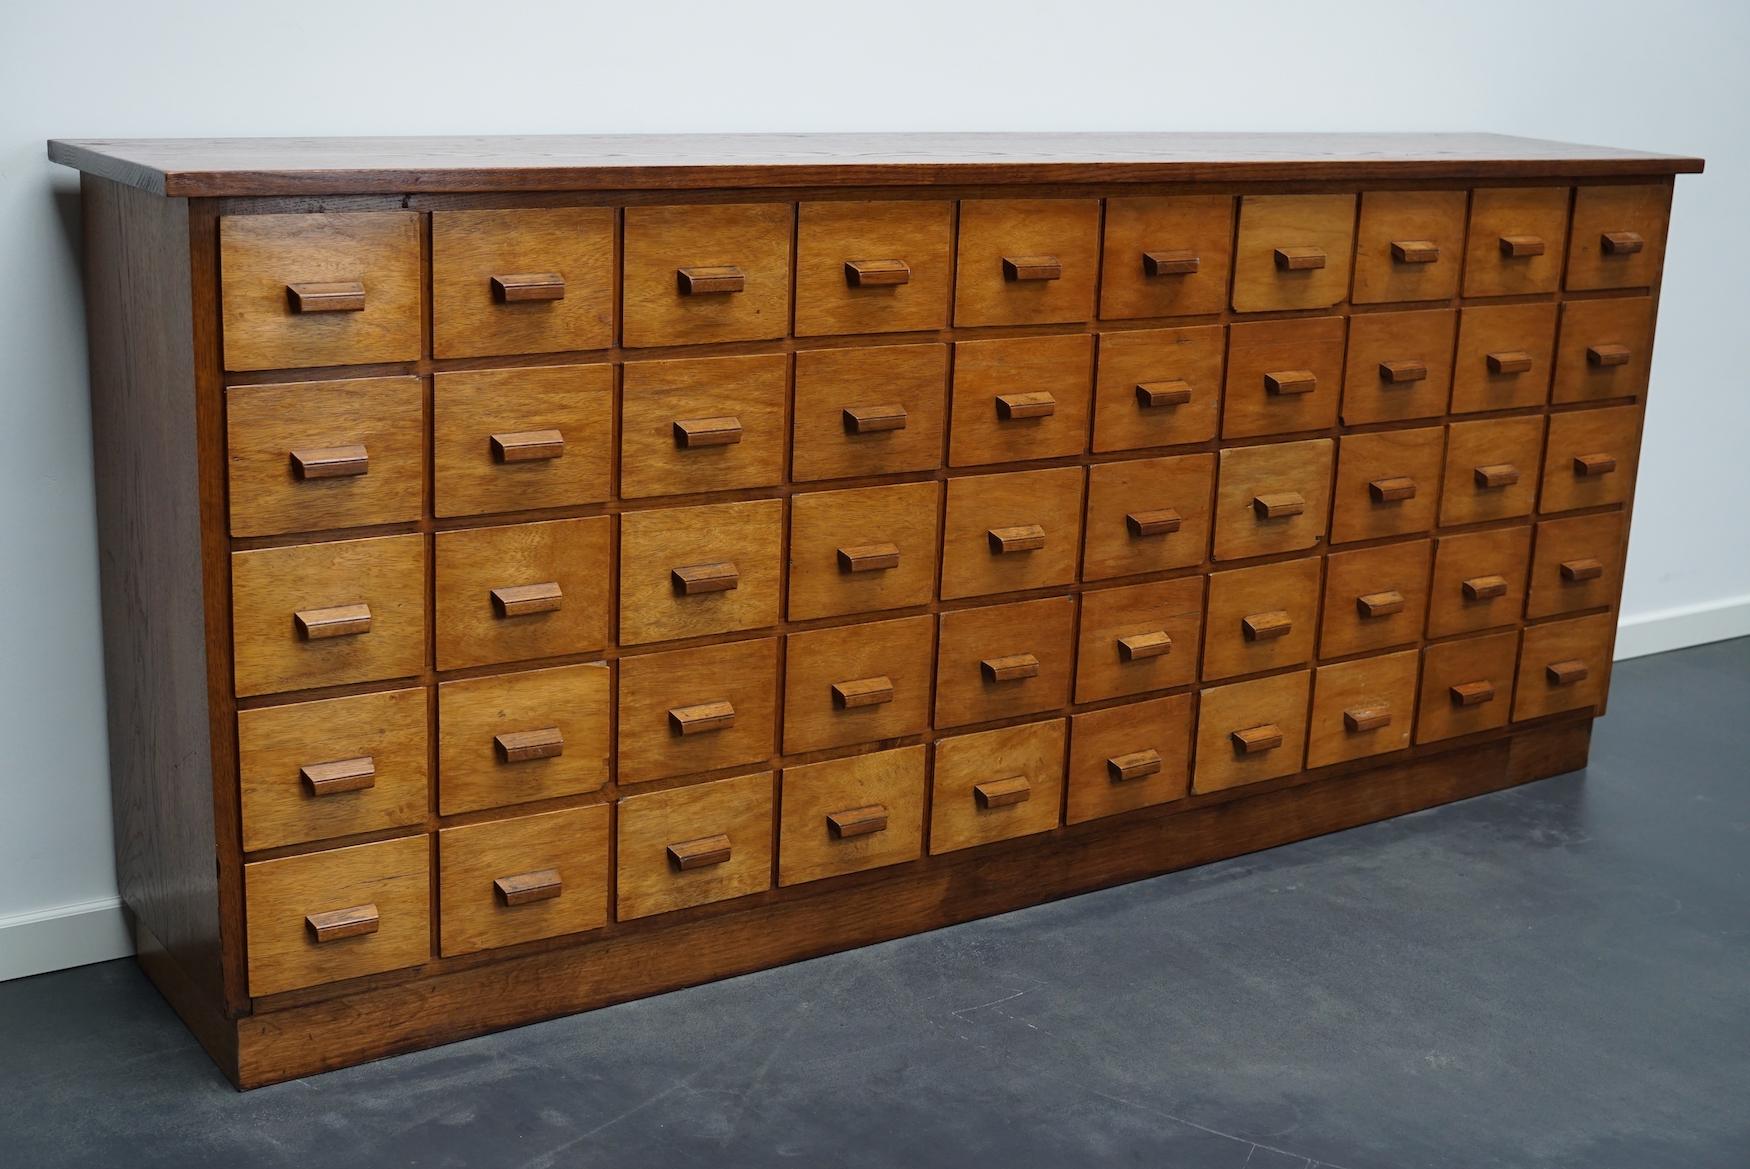 This apothecary cabinet was made circa 1950s in Germany. It features 50 drawers with oak handles. The interior dimensions of the drawers are: D x W x H 33 x 15 x 11 cm.